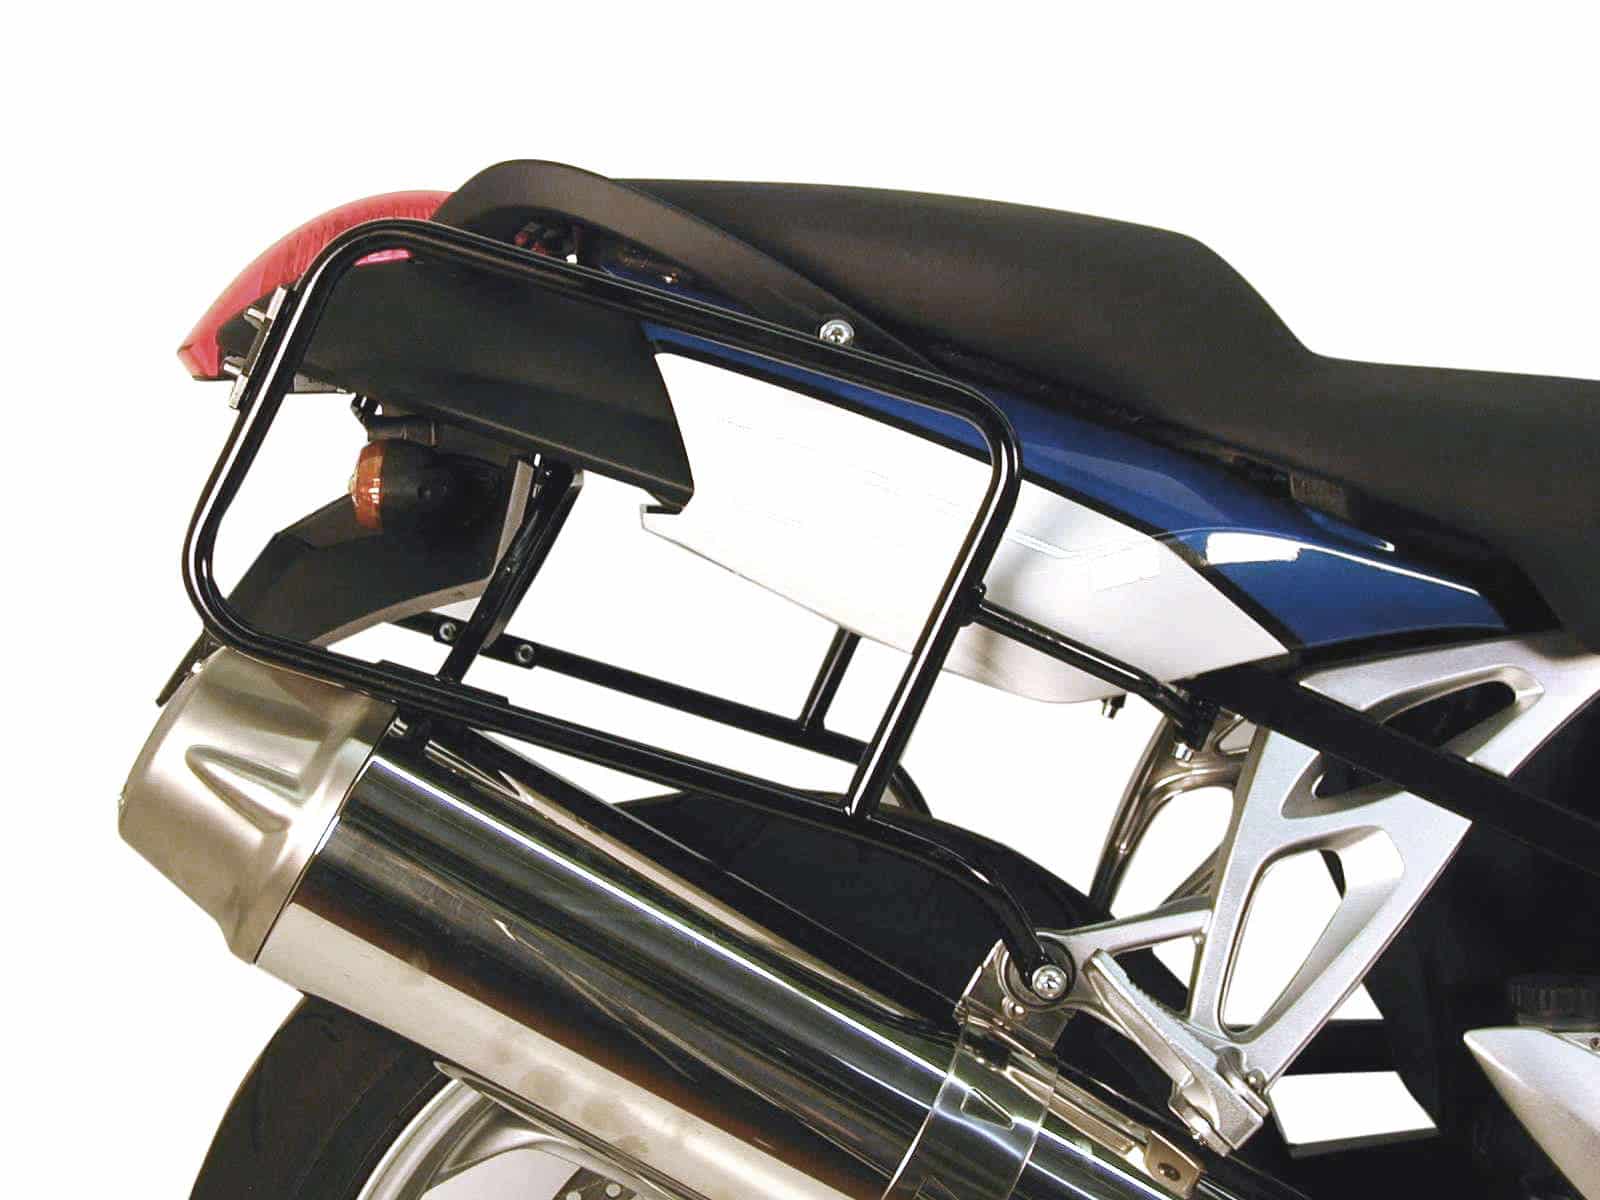 Sidecarrier permanent mounted black for BMW K 1200 S (2004-2008)/K 1300 S (2009-2016)